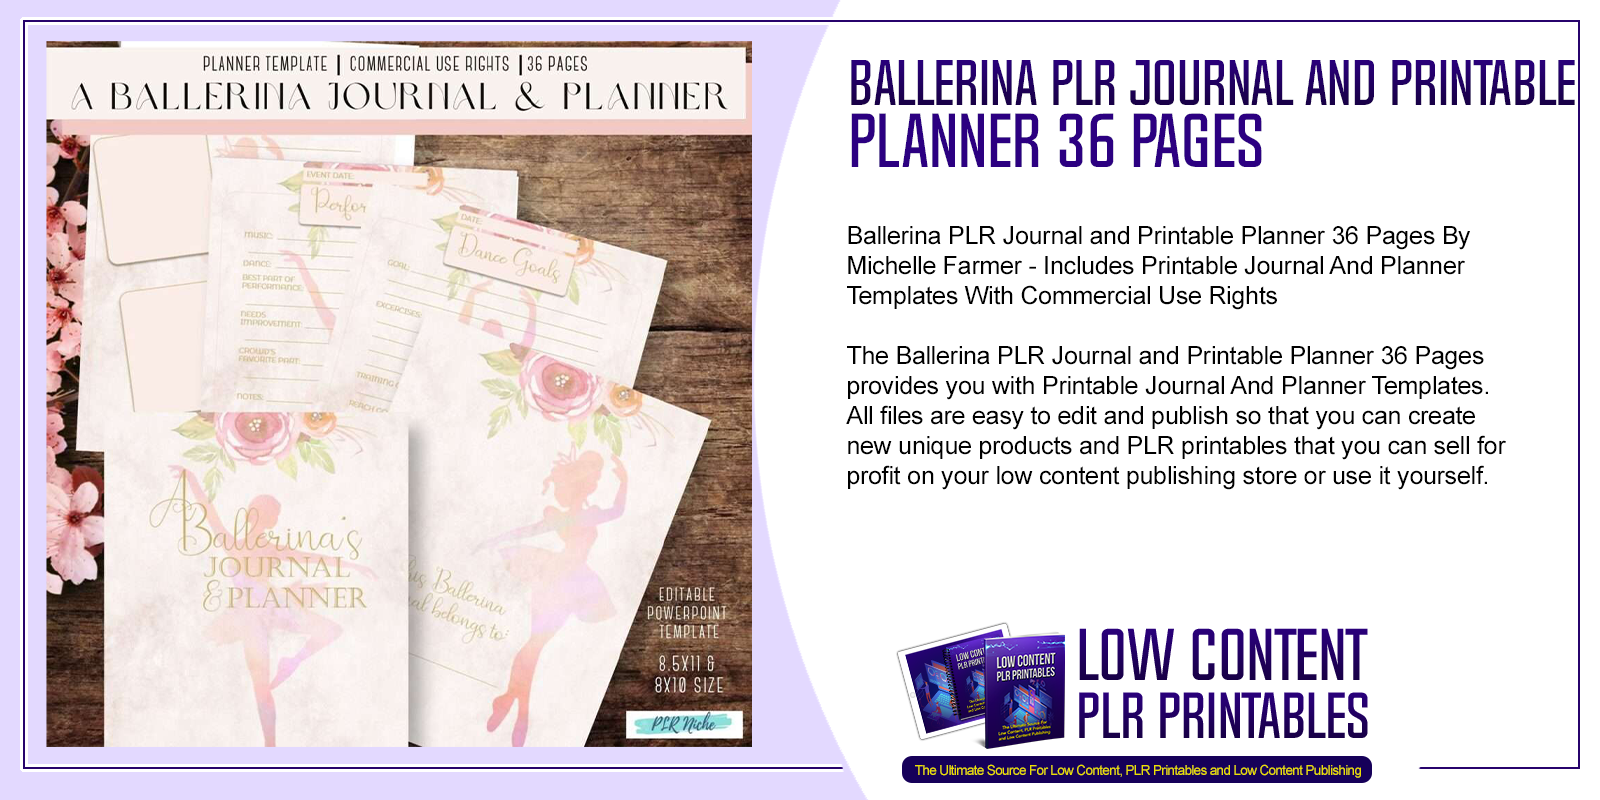 Ballerina PLR Journal and Printable Planner 36 Pages